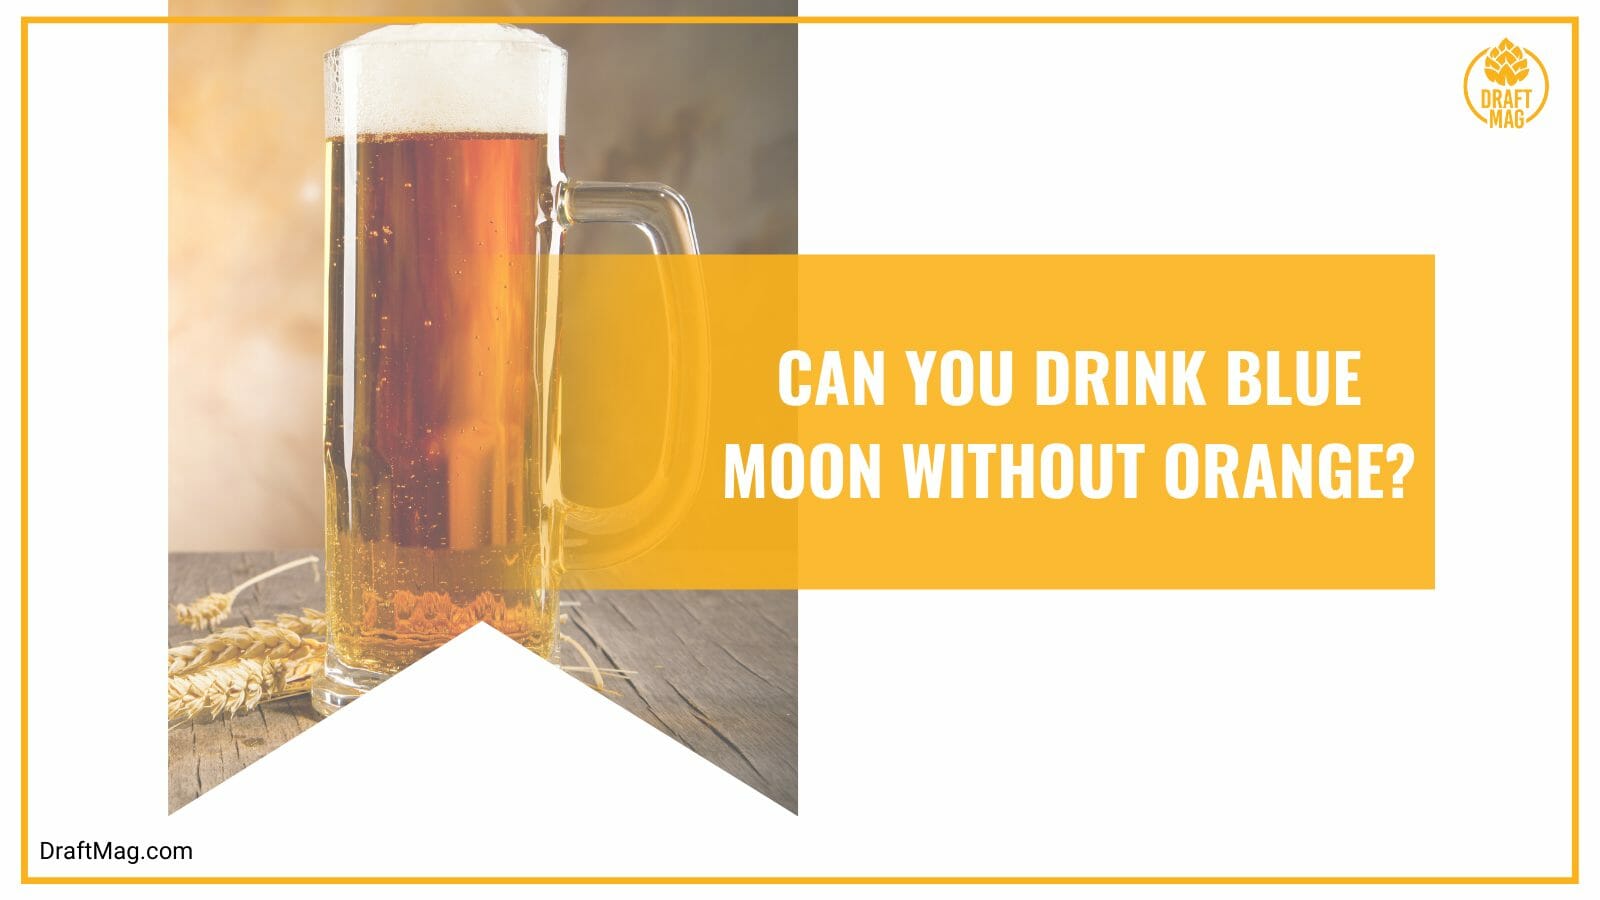 Drink blue moon without orange